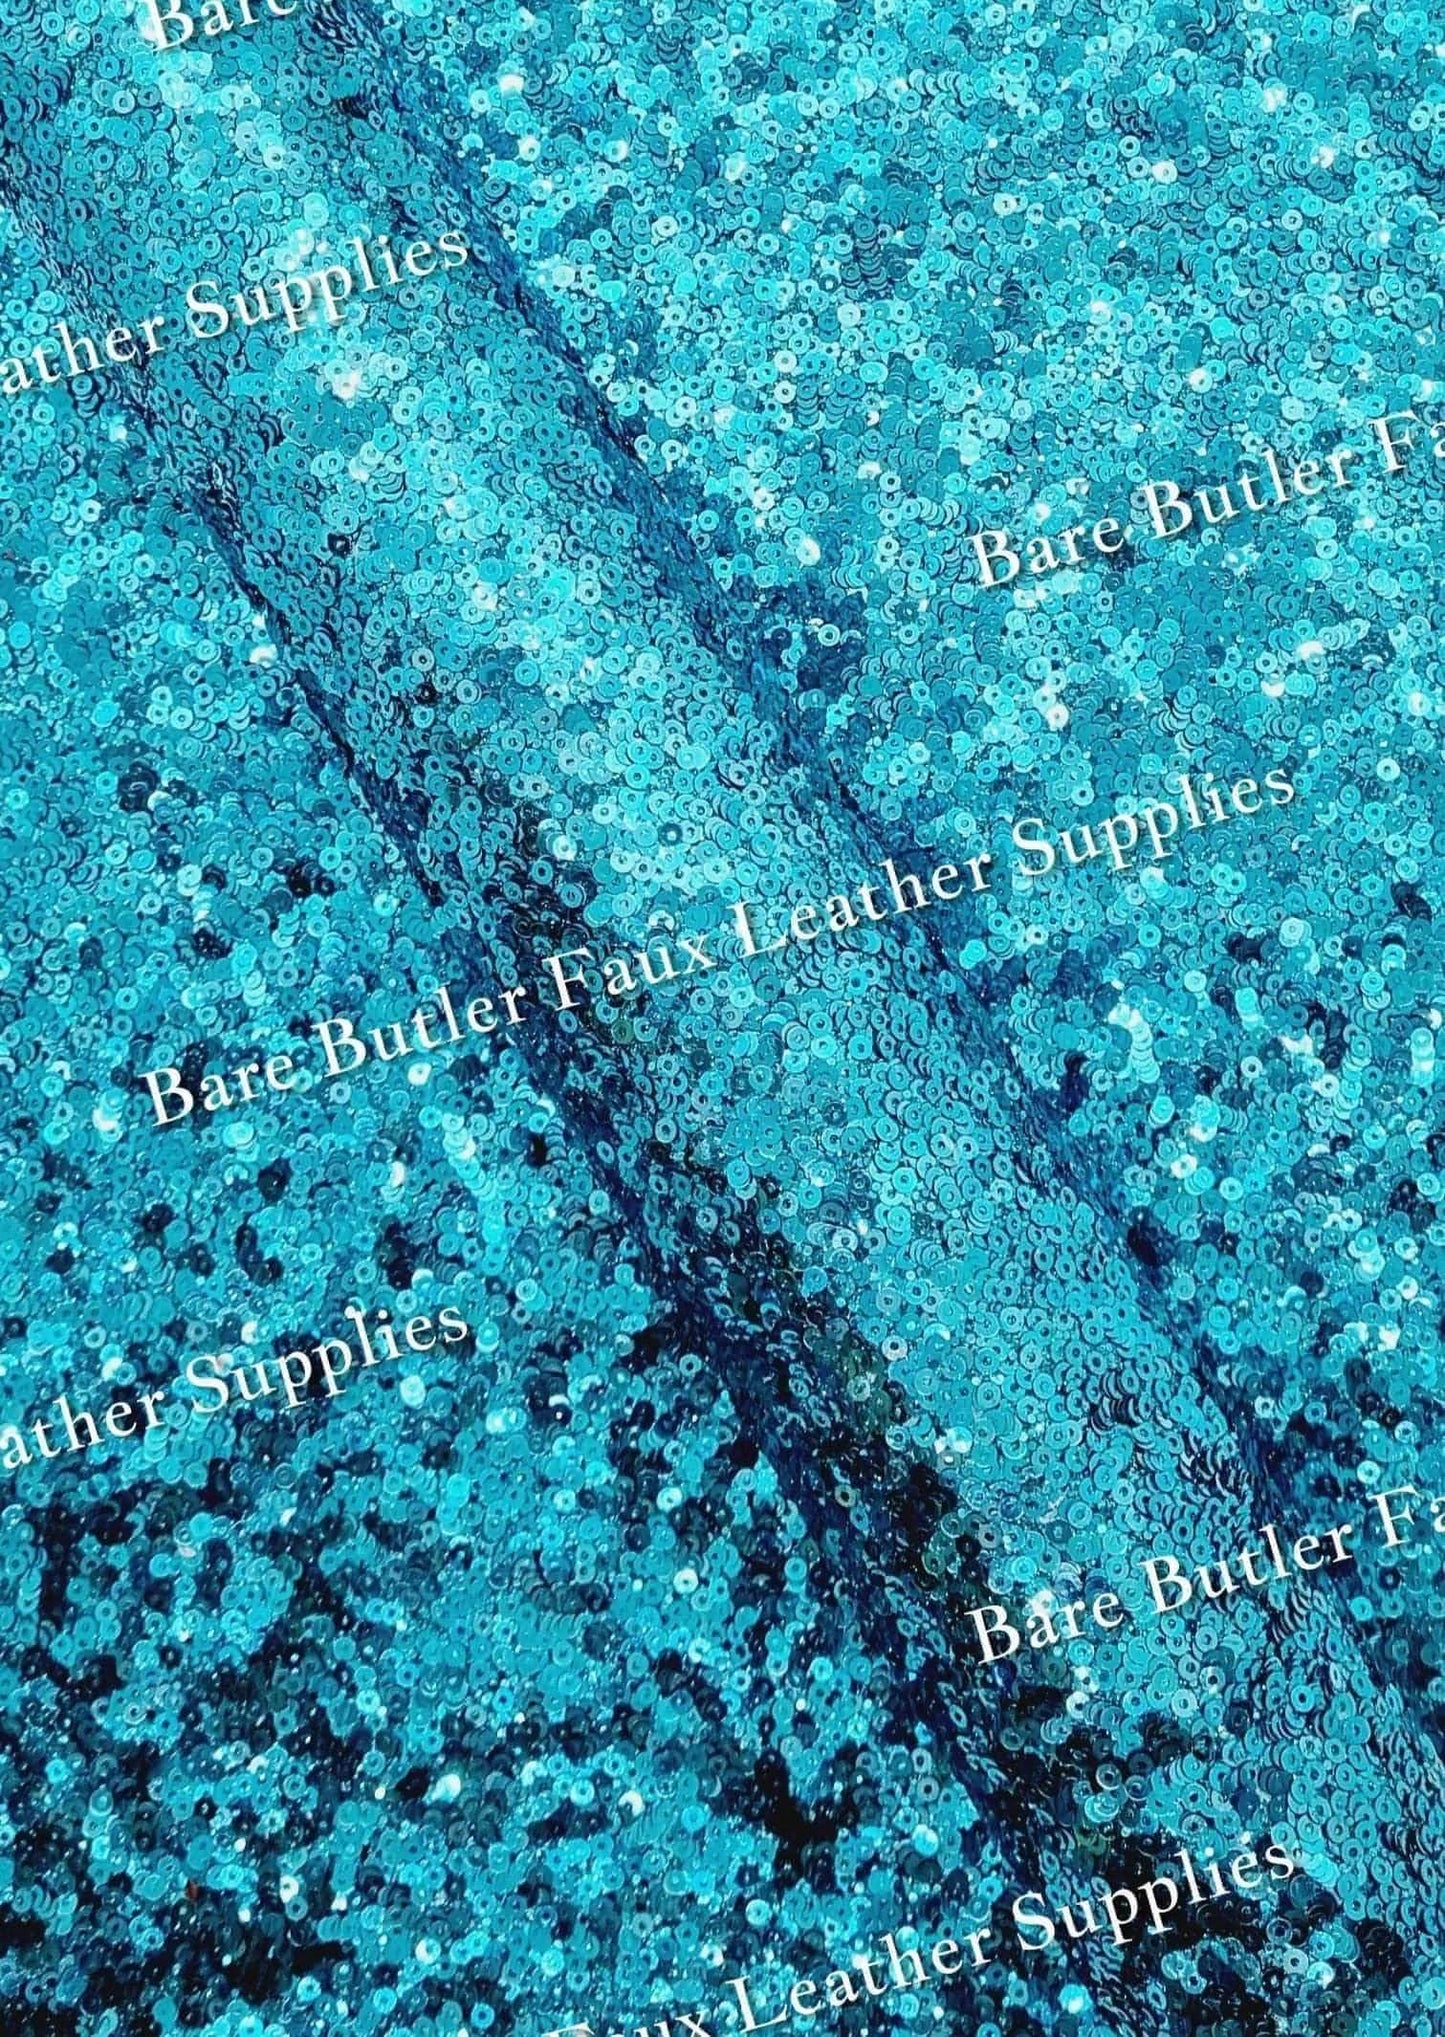 Chunky Glitter Sequin Shimmer Light Blue - chunky, Faux, Faux Leather, Glitter, Leather, leatherette, Sequin - Bare Butler Faux Leather Supplies 